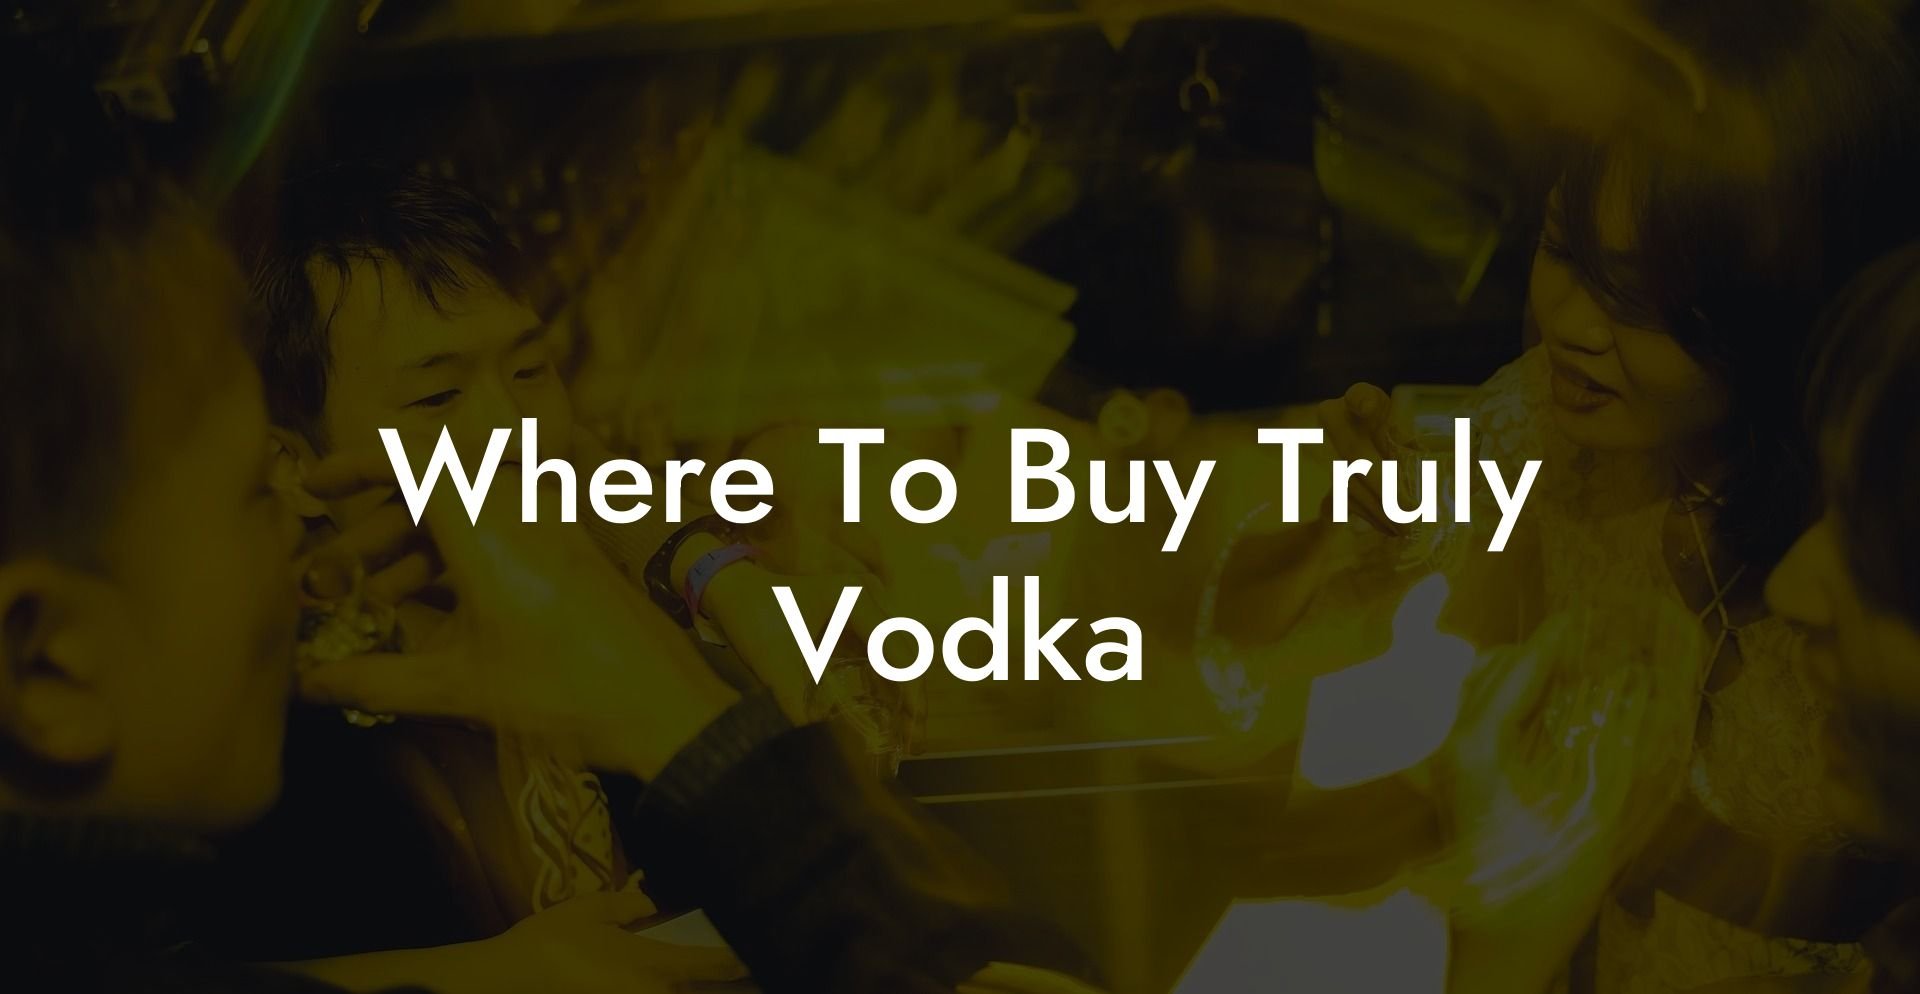 Where To Buy Truly Vodka